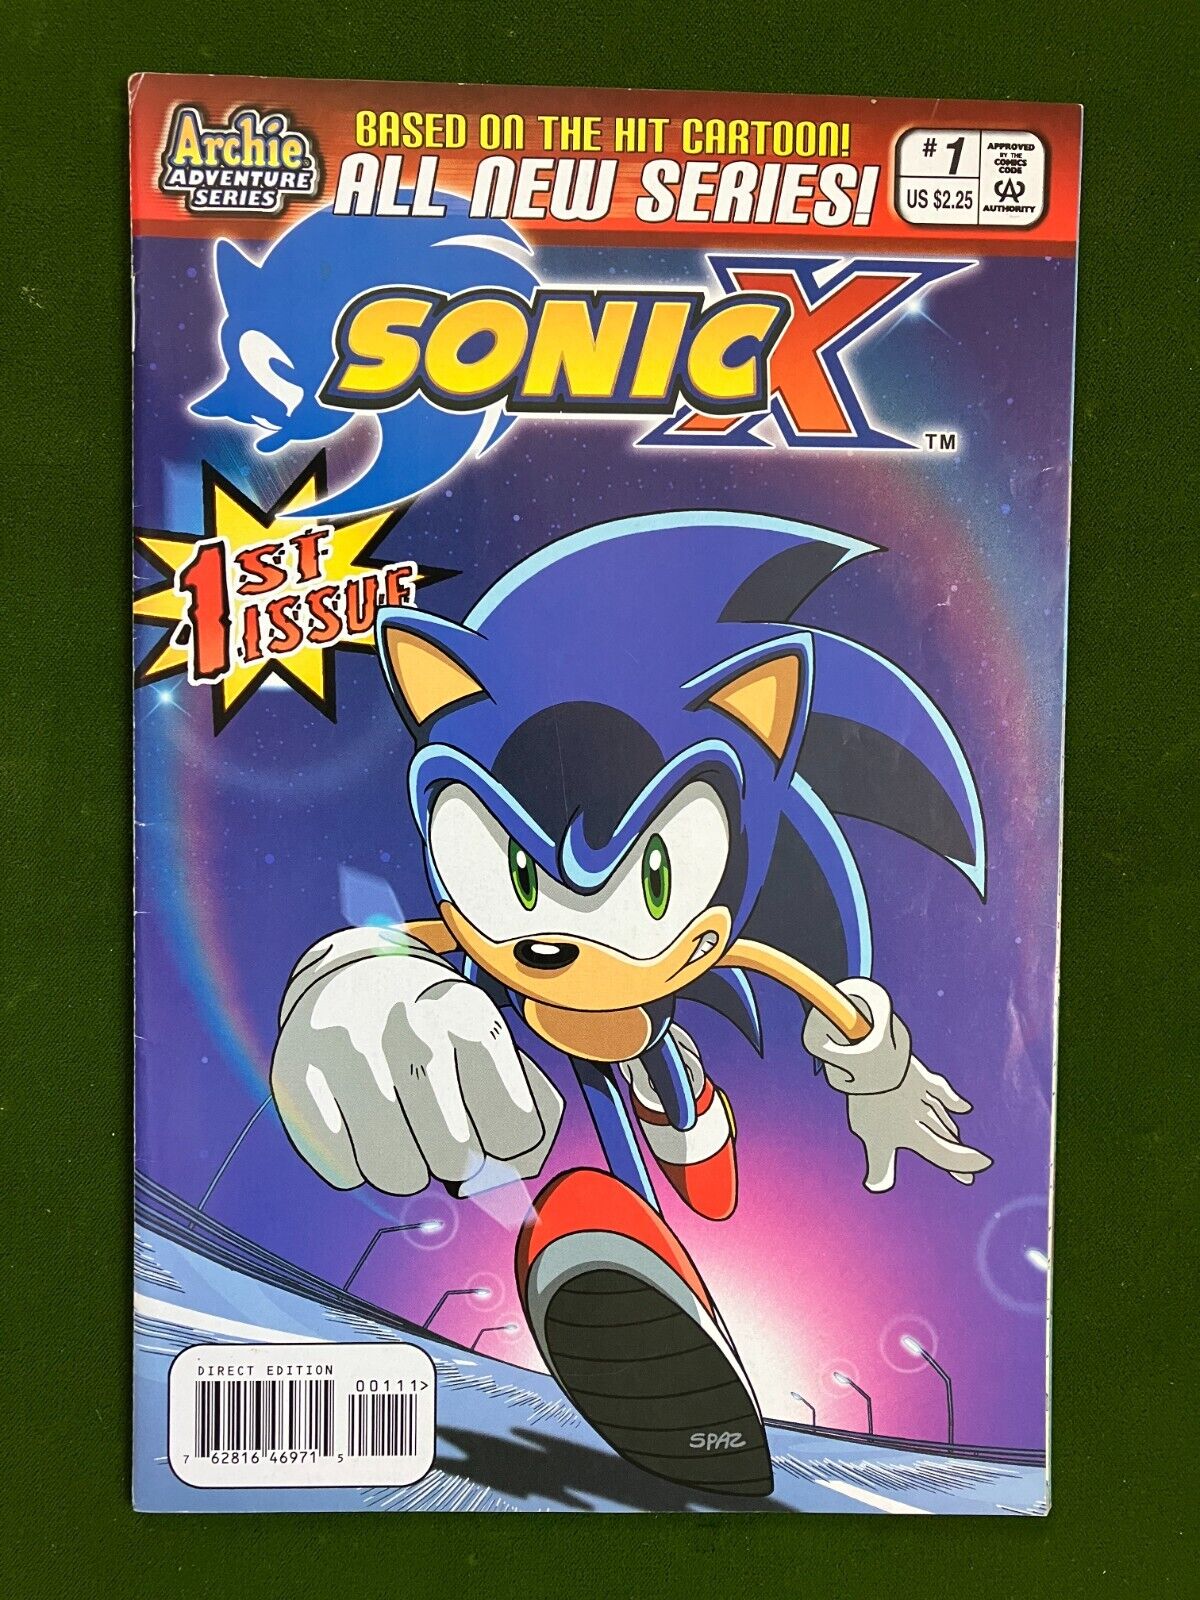 Sonic X #1 Archie Comics NM - Rare Direct Edition Boarded and Bagged